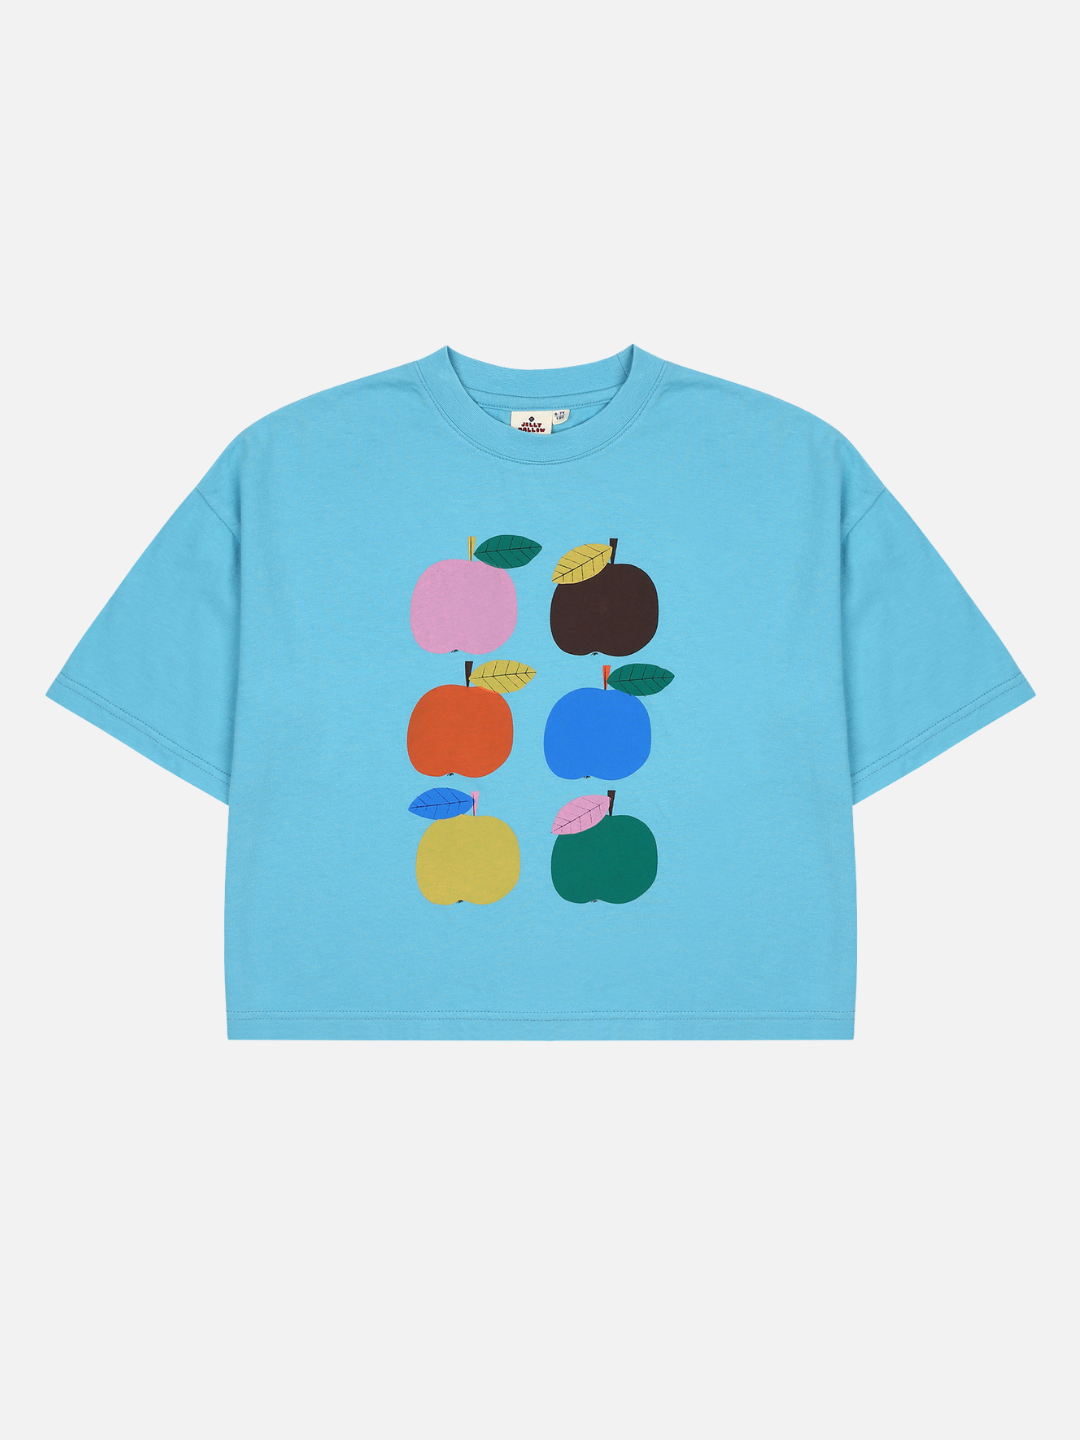 Front of Colorful Apple Tshirt. Six differently colored apple motifs in two vertical rows on a light blue background.